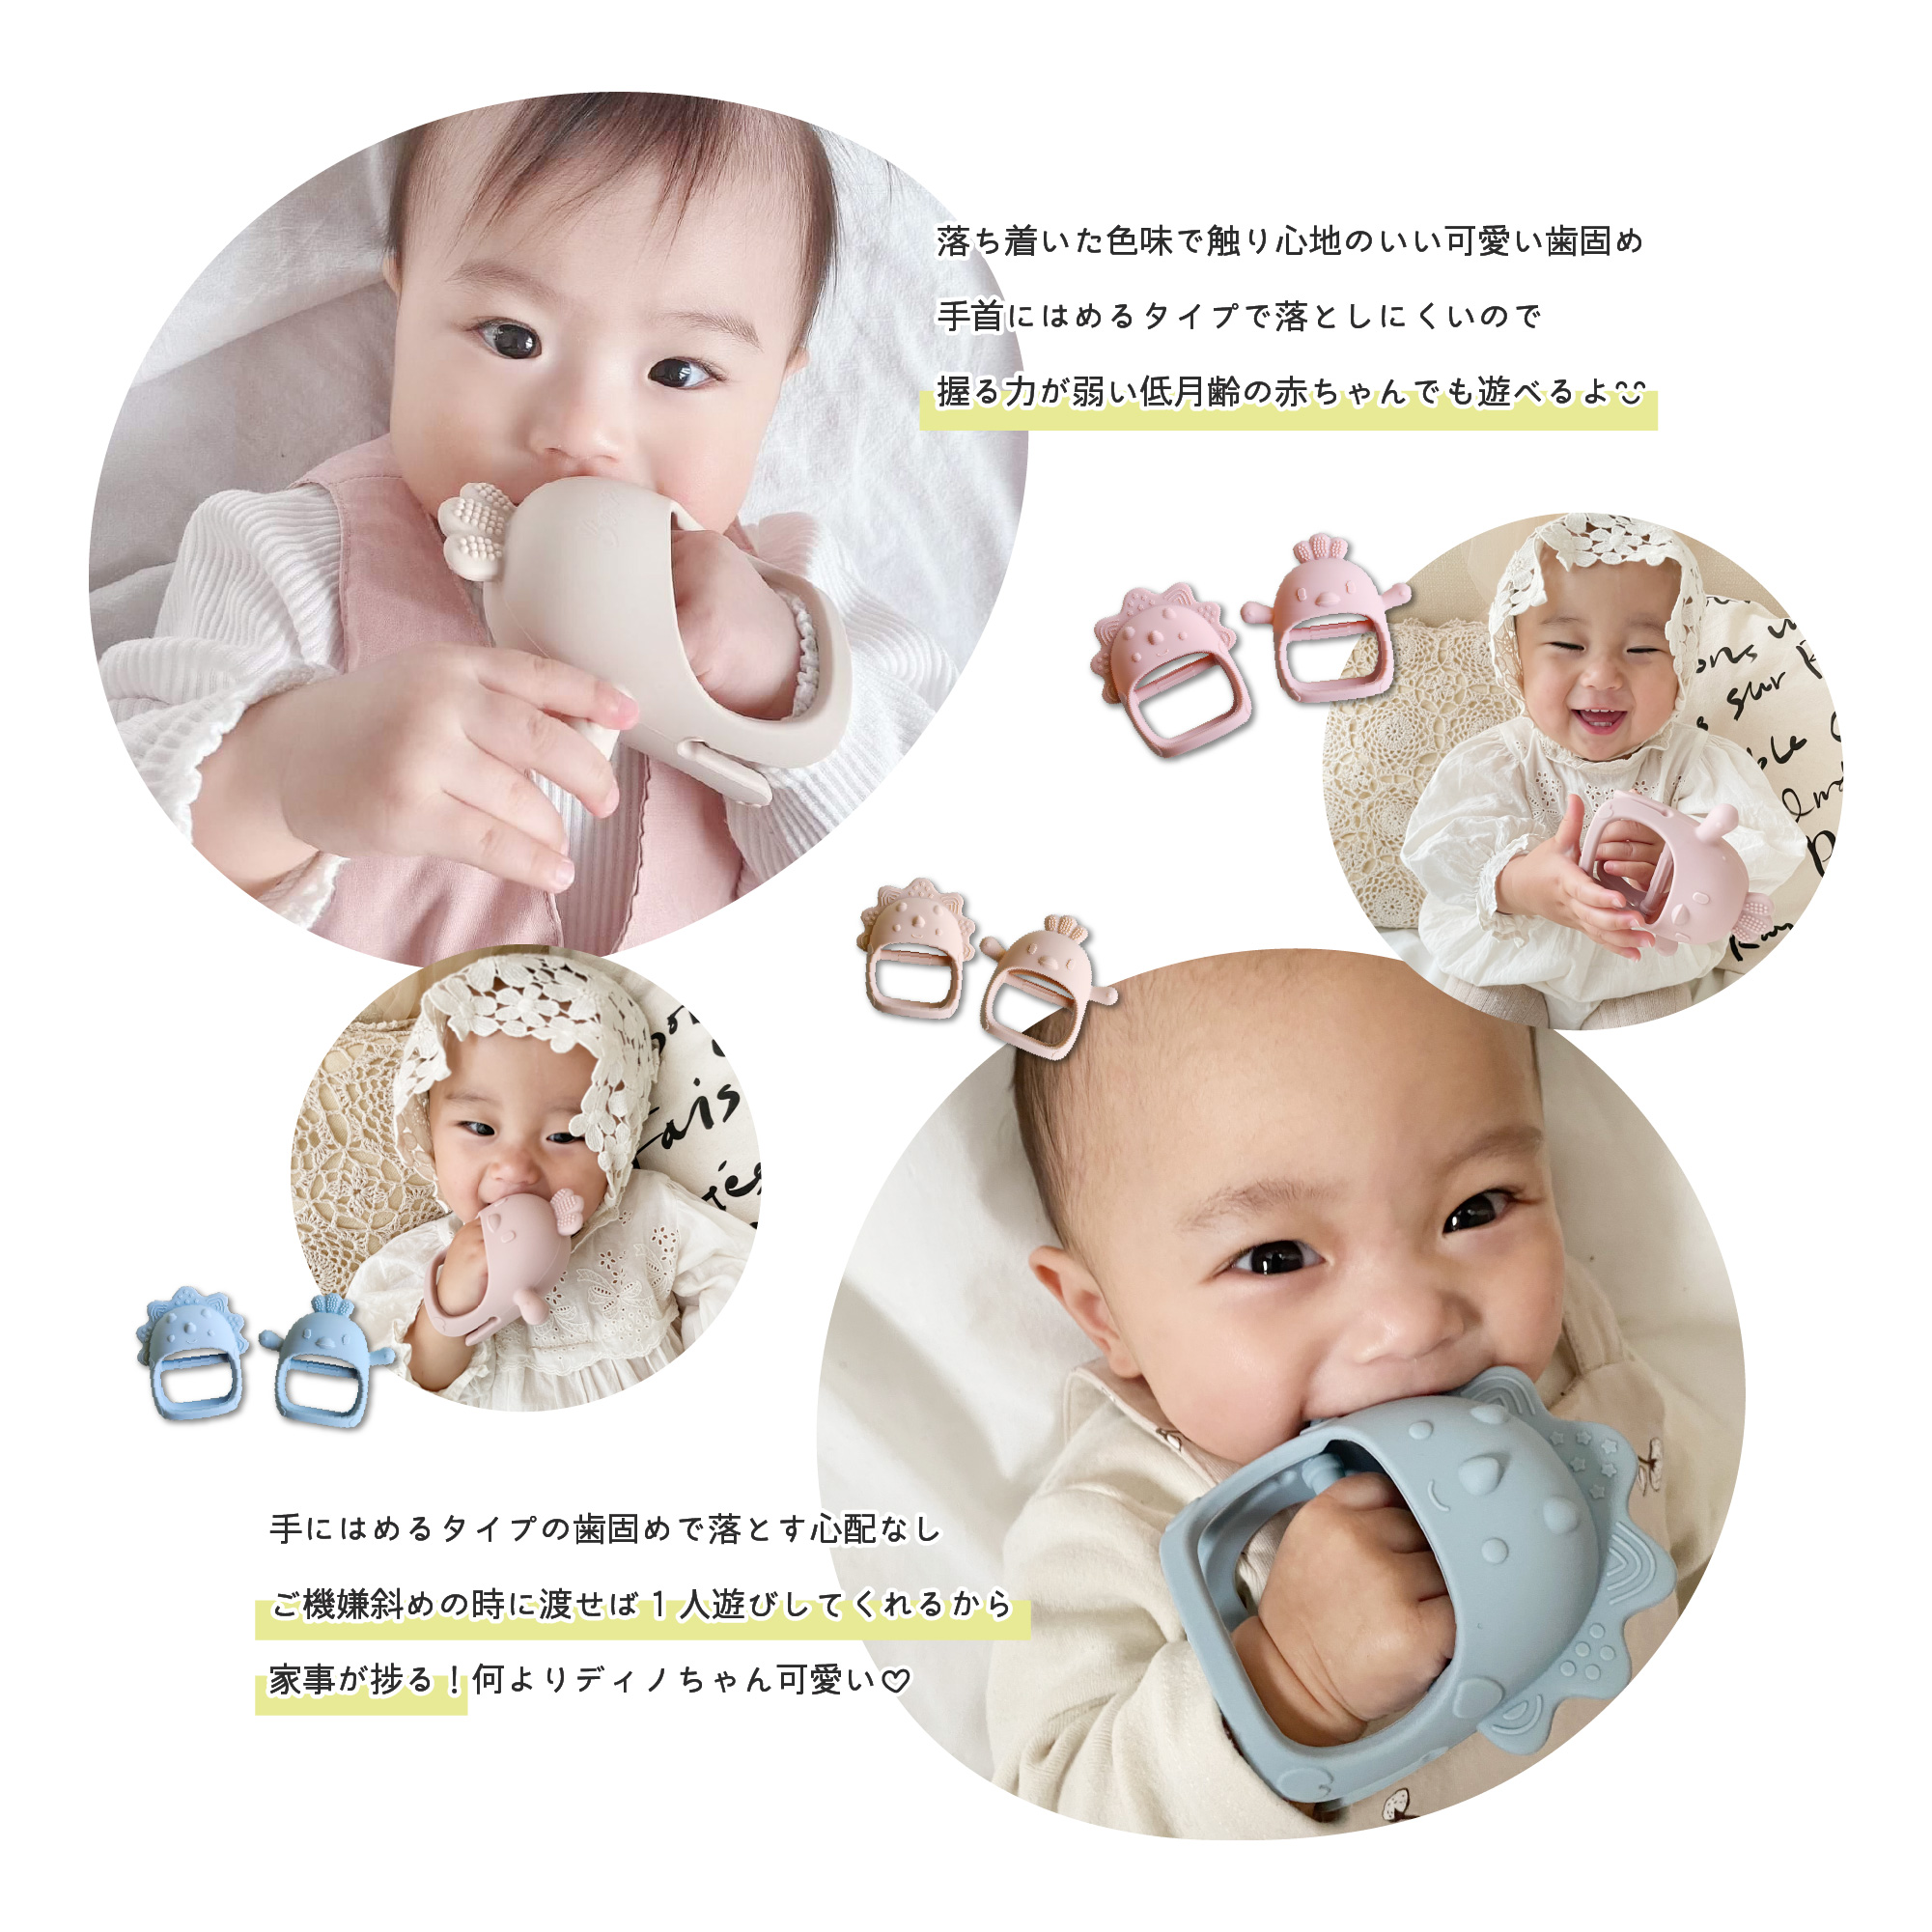  baby tooth hardening toy silicon ....chi gold tooth . therefore pacifier toy food sanitation law inspection clear safety baby newborn baby BPA free 0 -years old 1 -years old celebration of a birth gift 